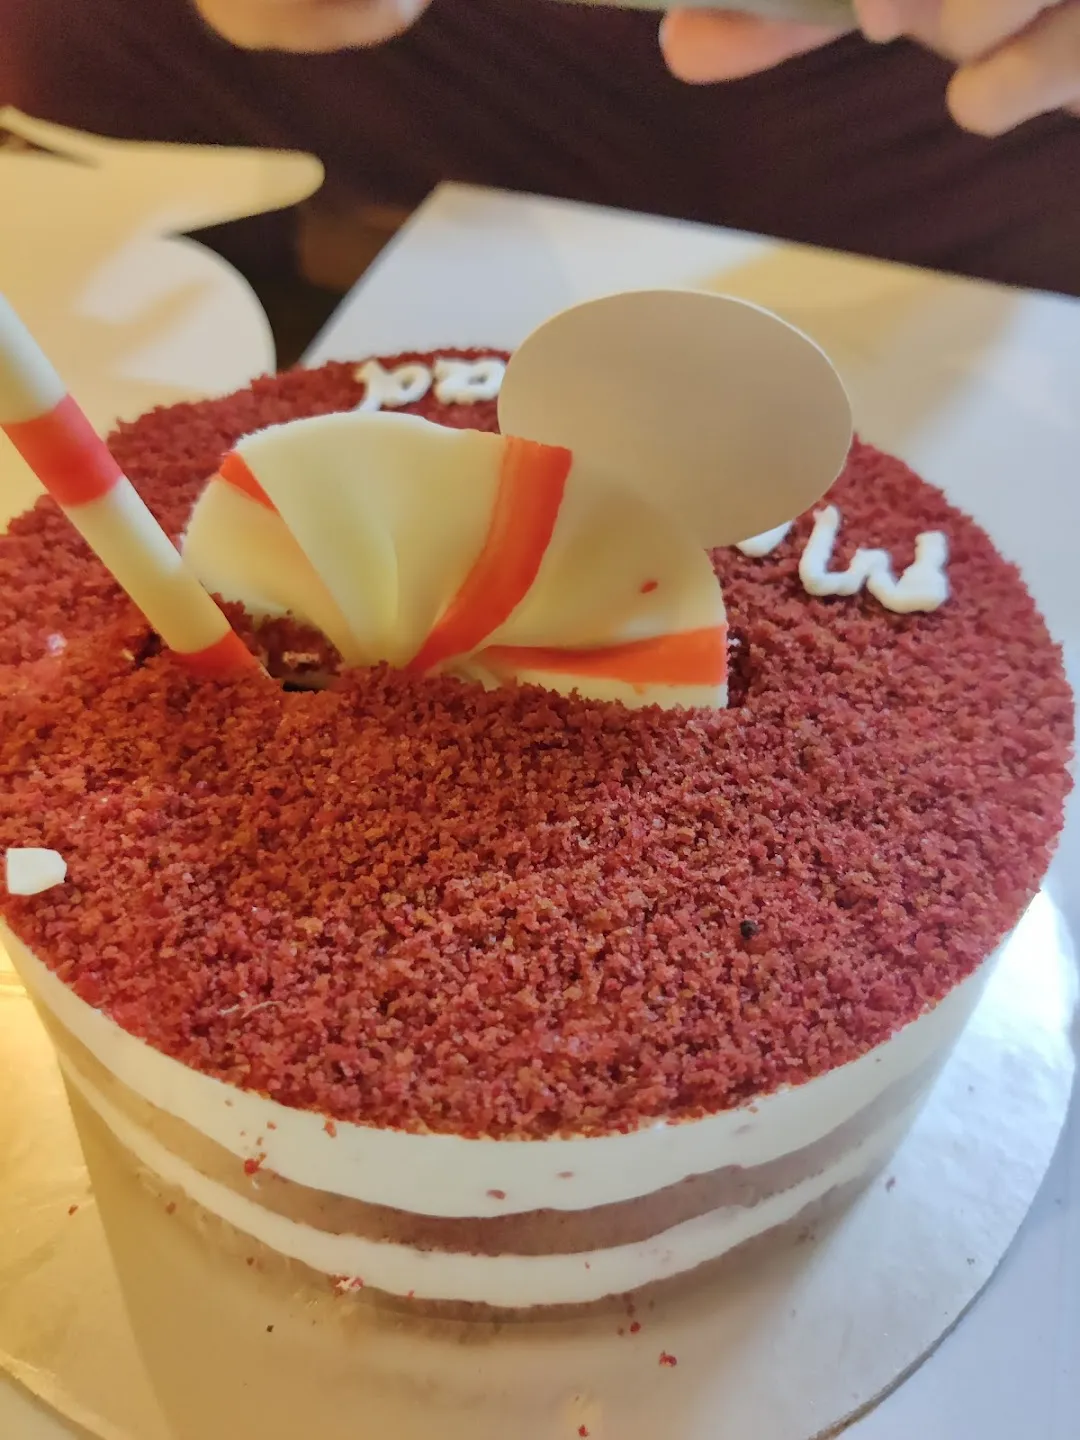 Discover more than 62 hangout cake viviana mall latest - in.daotaonec